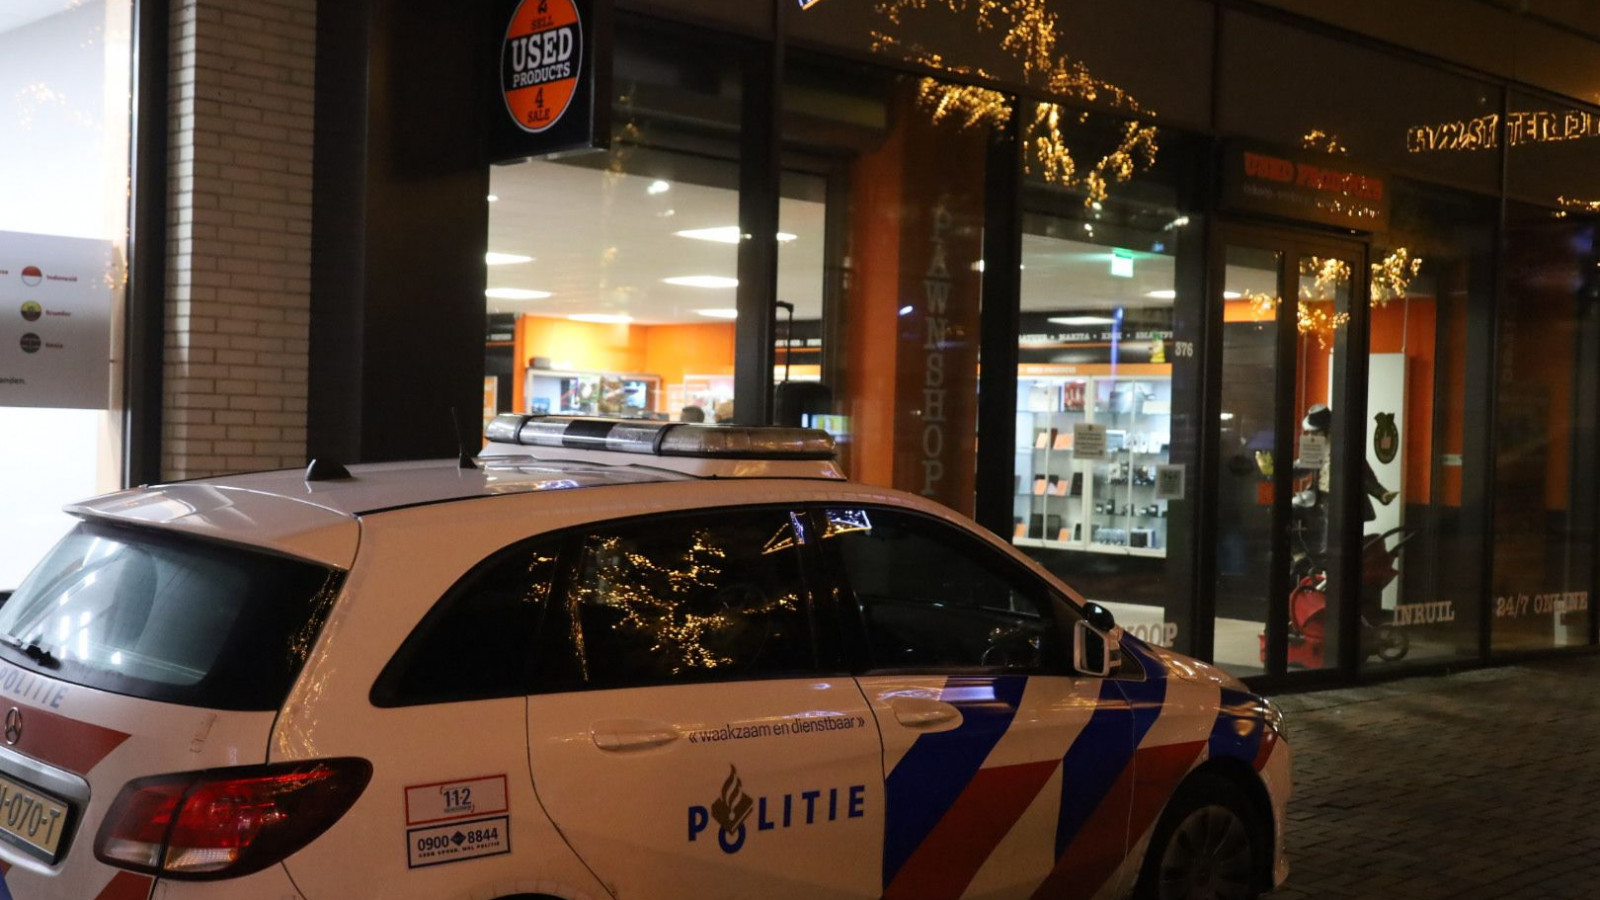 Overval op Used Products Bijlmerplein